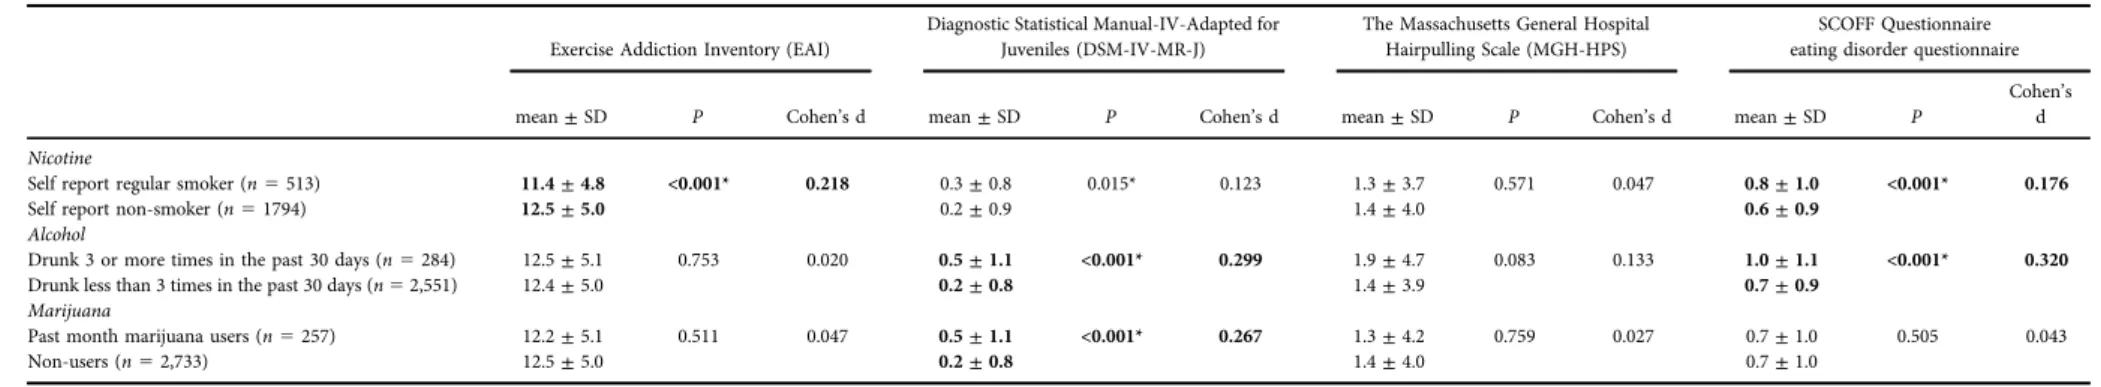 Table 3B. Severity of potential behavior addictions by regular psychoactive substance users and non-users